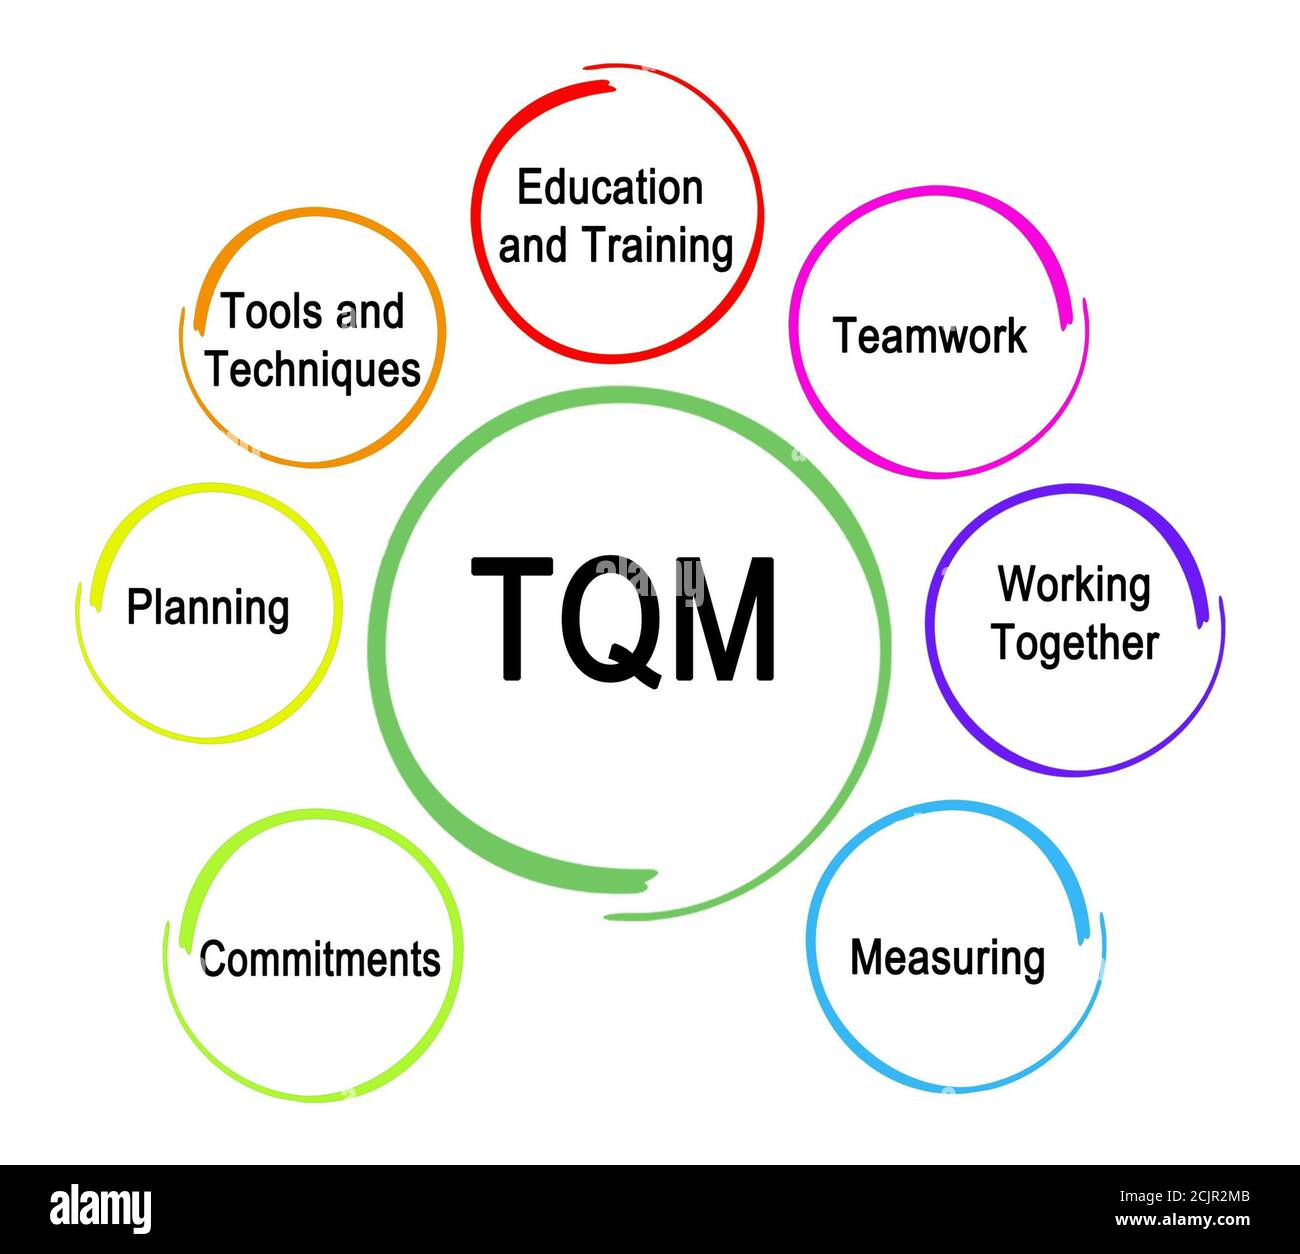 Total Quality Management System